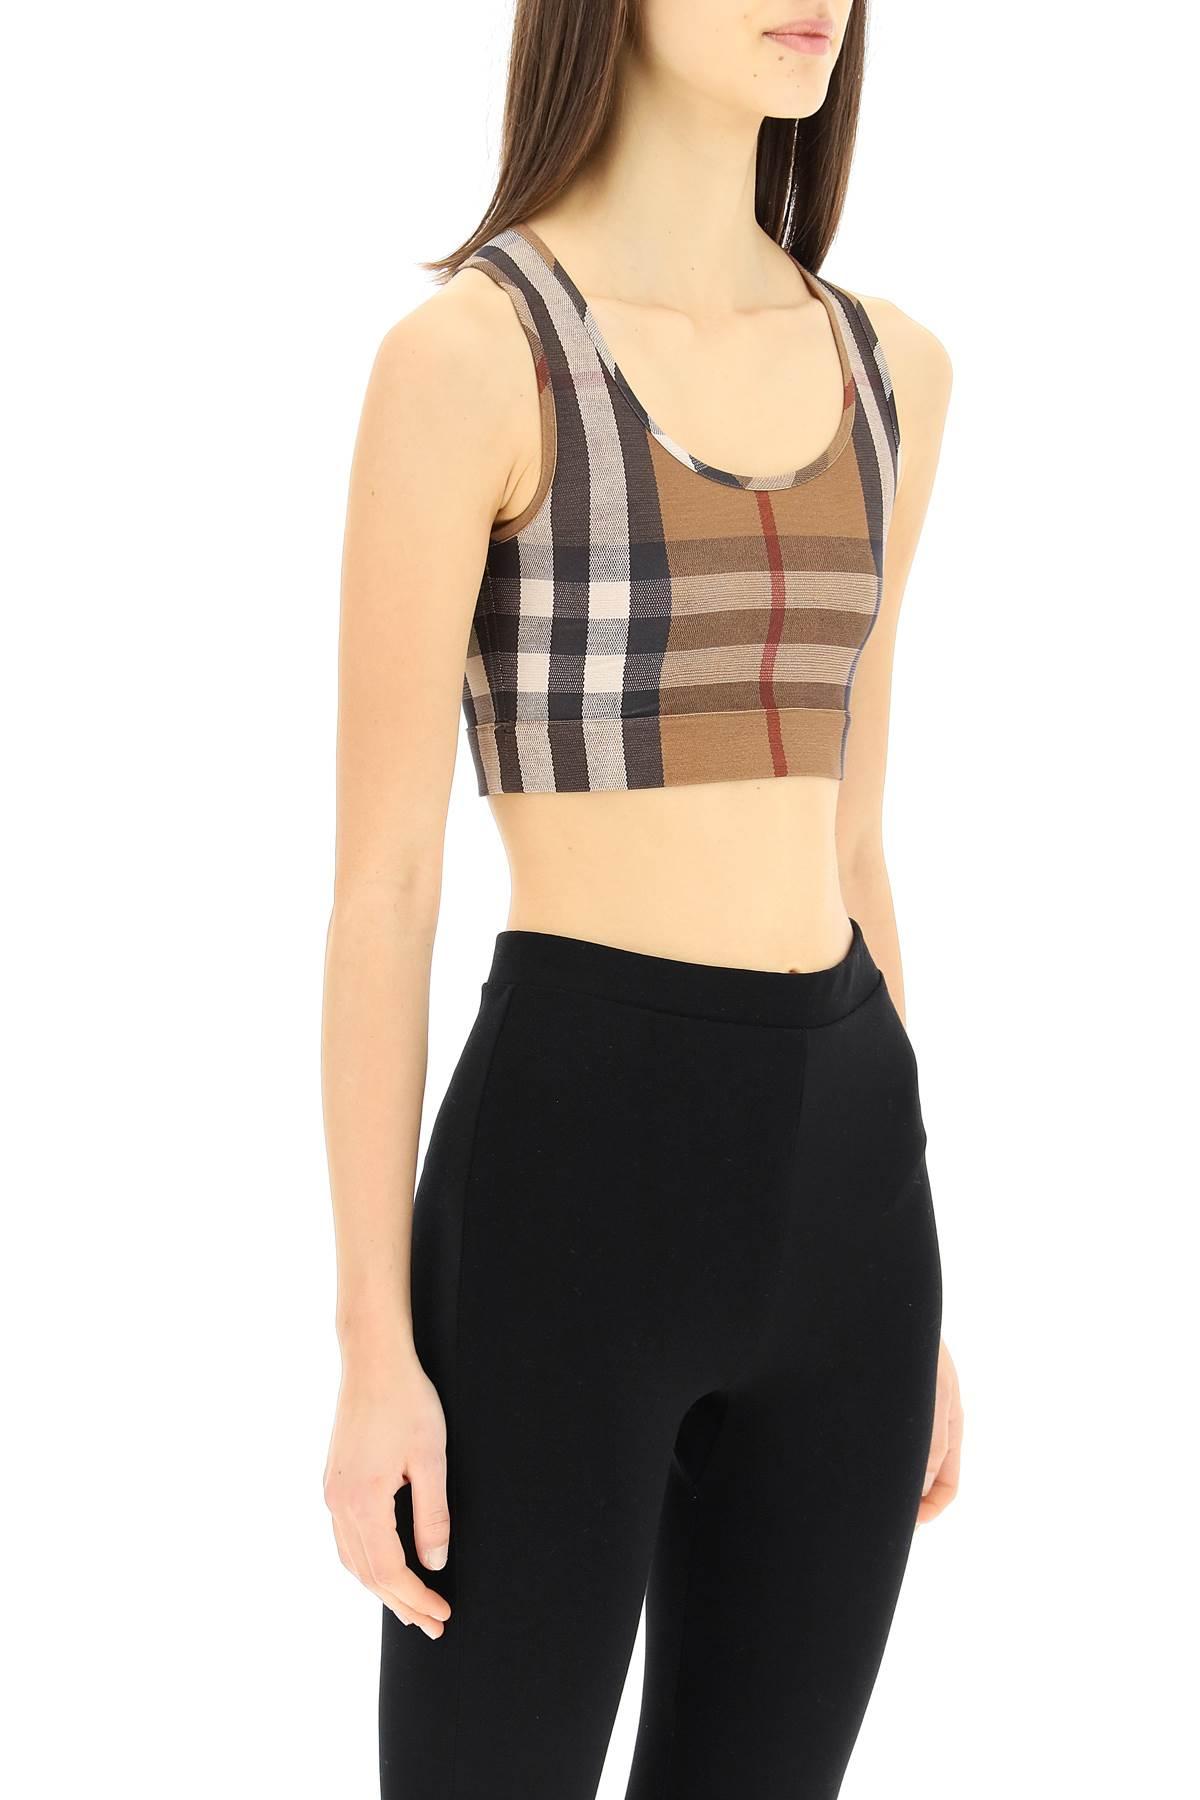 Burberry Synthetic Tartan Sporty Top in Brown (Black) | Lyst